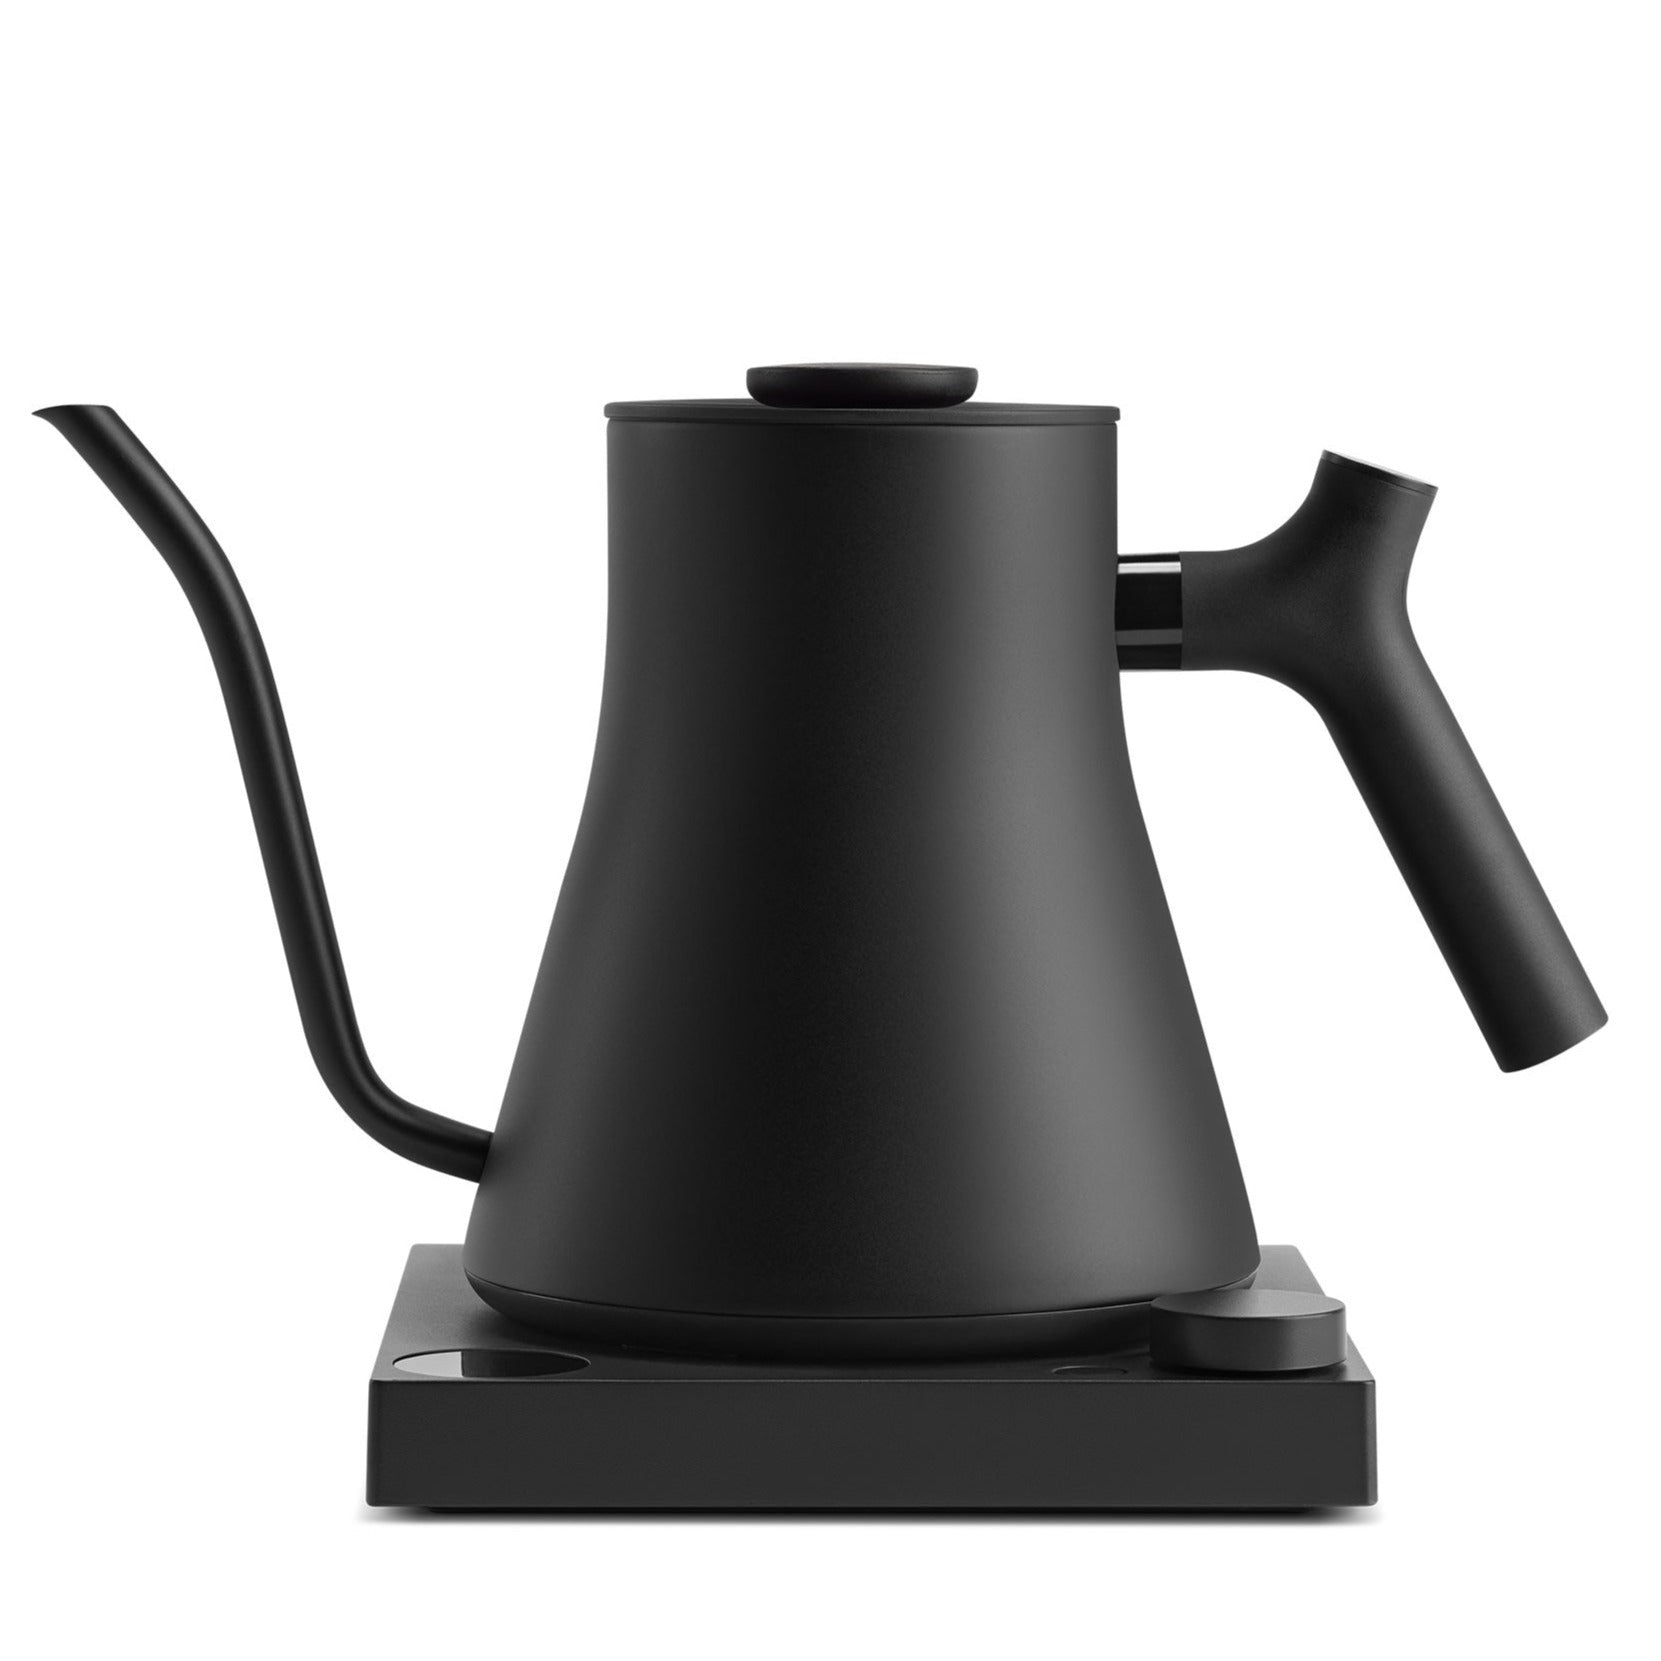 Stagg EKG Pro Electric KettleStagg EKG Pro Electric KettleCollective Coffee RoastersWe took what we do best, and made it better. Introducing Stagg EKG Pro, a game-changing evolution to our signature pour-over kettle. With fully customizable brew set